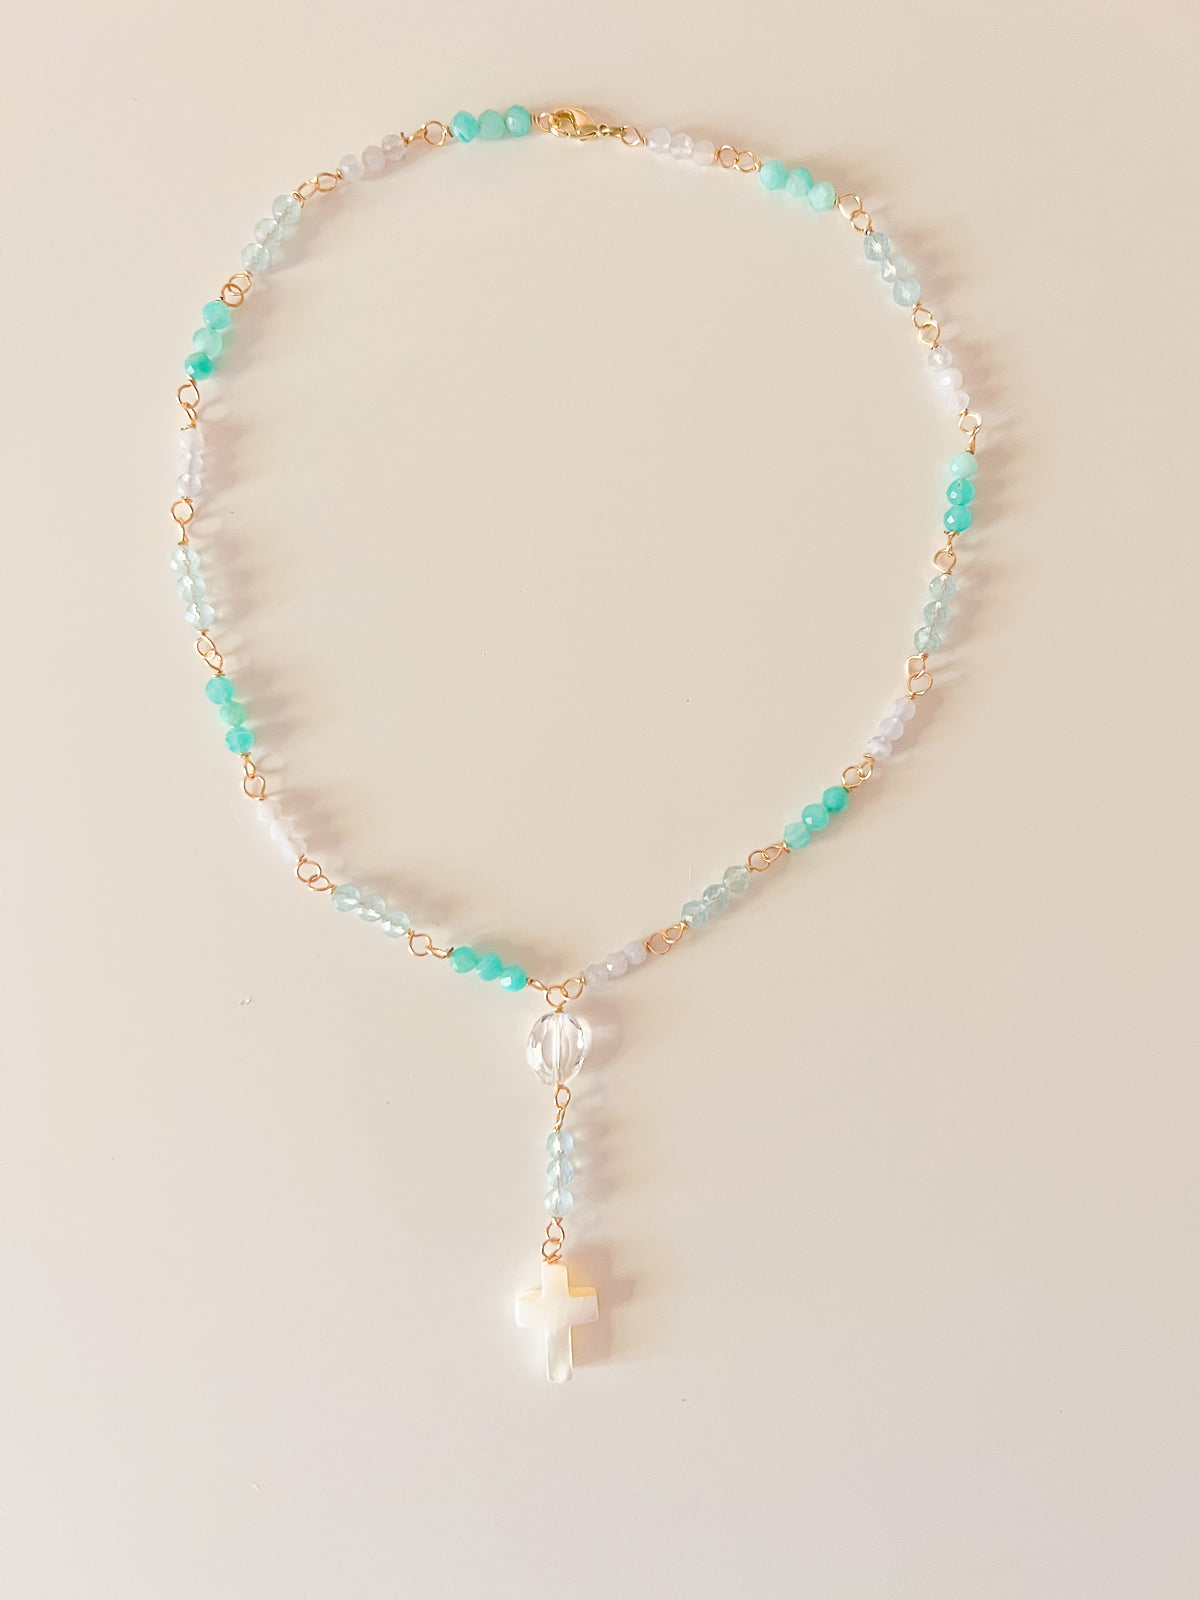 Endless Blue Dreams Rosary Gemstone Necklace